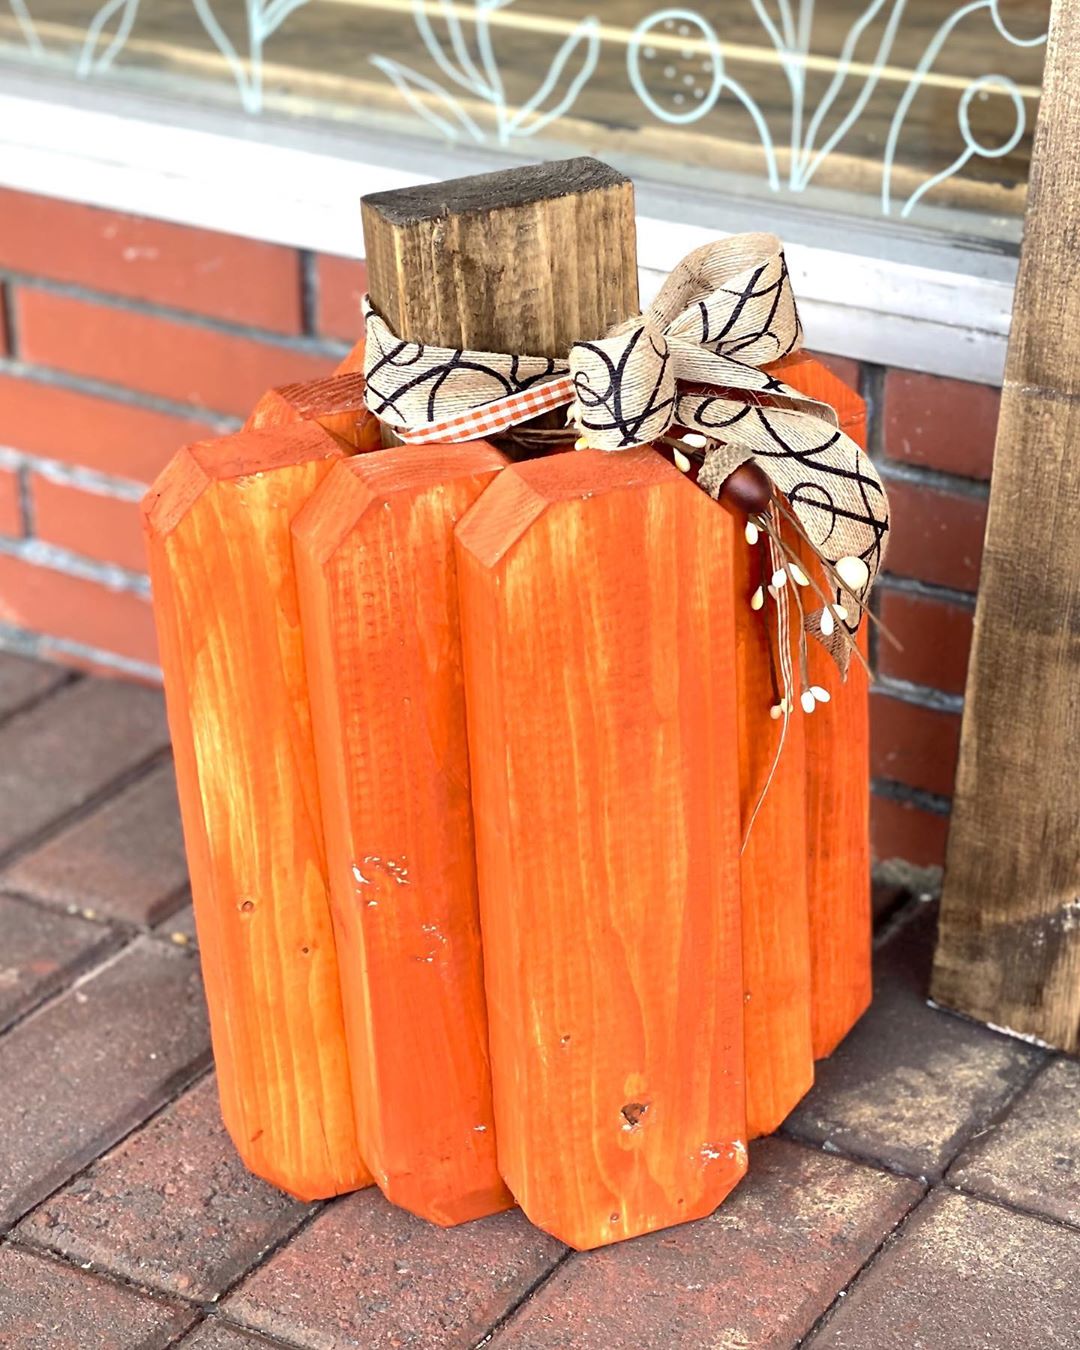 Pieces of Wood Nailed Together to Look like a Pumpkin. Photo by Instagram user @thesassycownc